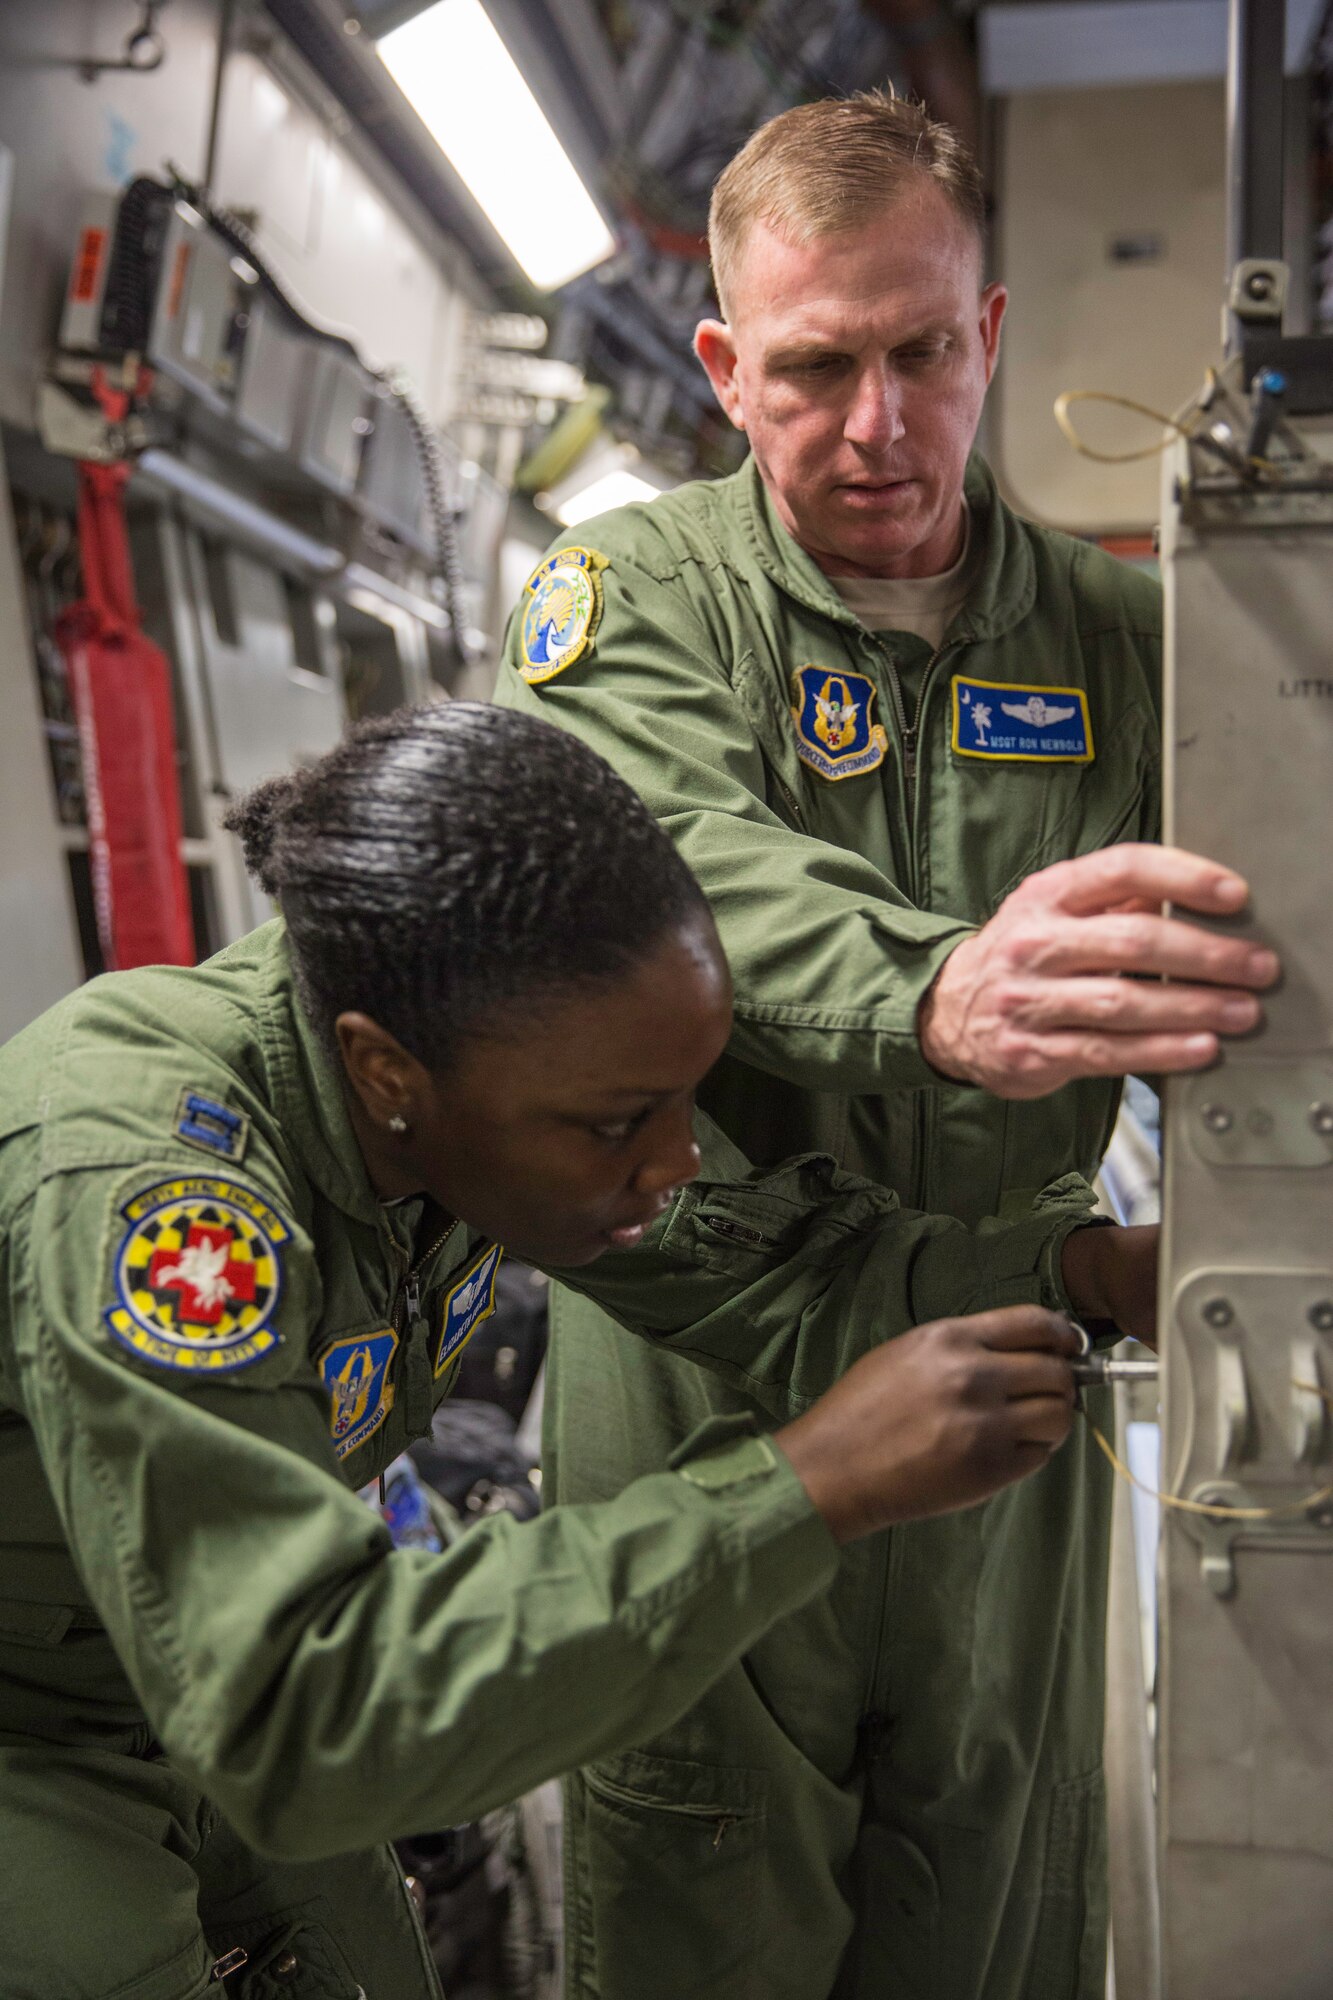 Master Sgt. Ron Newbold helps Capt. Elizabeth Kotey set up a litter stanchion Feb. 22, 2015 during a training mission in San Juan, Puerto Rico. The mission was part of a three day fly-away with Airmen from the 315th Airlift Wing at Joint Base Charleston, S.C. and aeromedical Airmen from the 459th Air Refueling Wing at Joint Base Andrews, Md. The training mission was a cost-effective means to accomplish currency items and evaluations for flight crew members and provided C-17 familiarization and proficiency training for aeromedical Airmen. Newbold is a loadmaster with the 300th Airlift Squadron and Kotey is a flight nurses with the 459th Aeromedical Evacuation Squadron (U.S. Air Force Photo/Tech. Sgt. Shane Ellis)